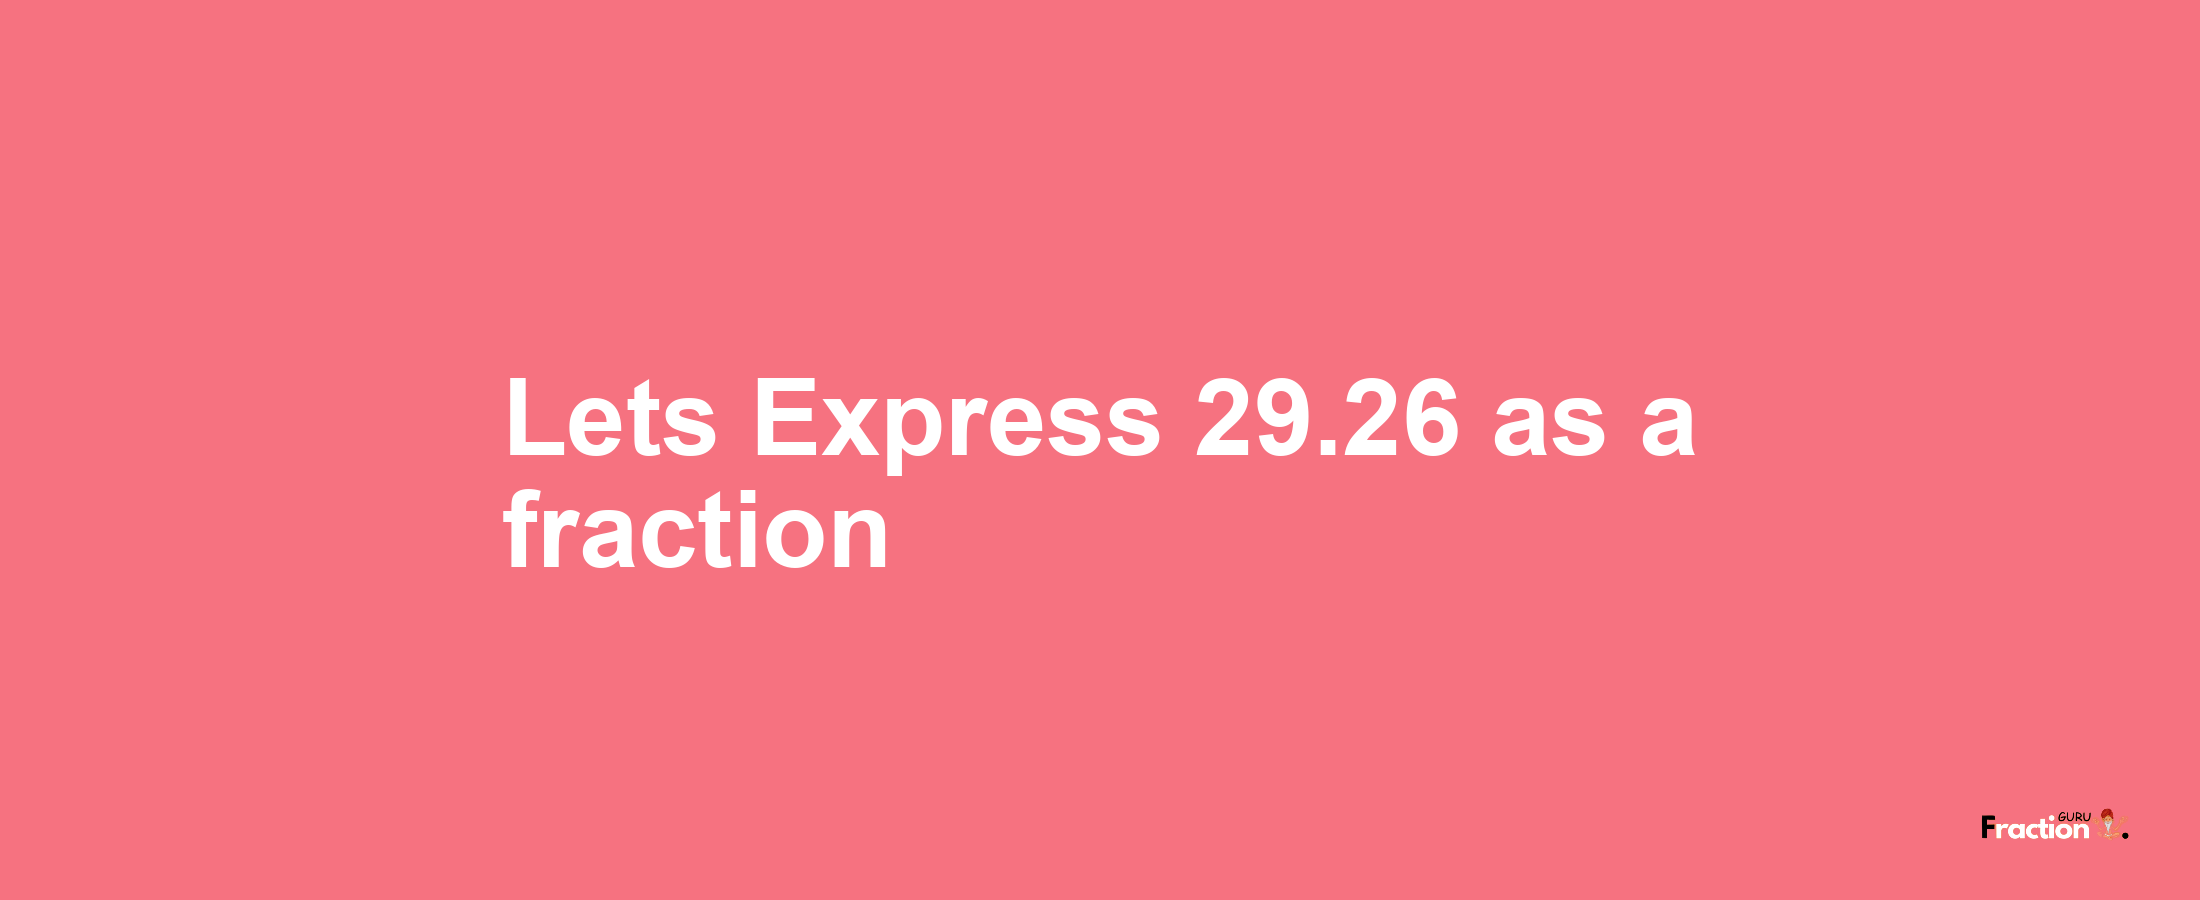 Lets Express 29.26 as afraction